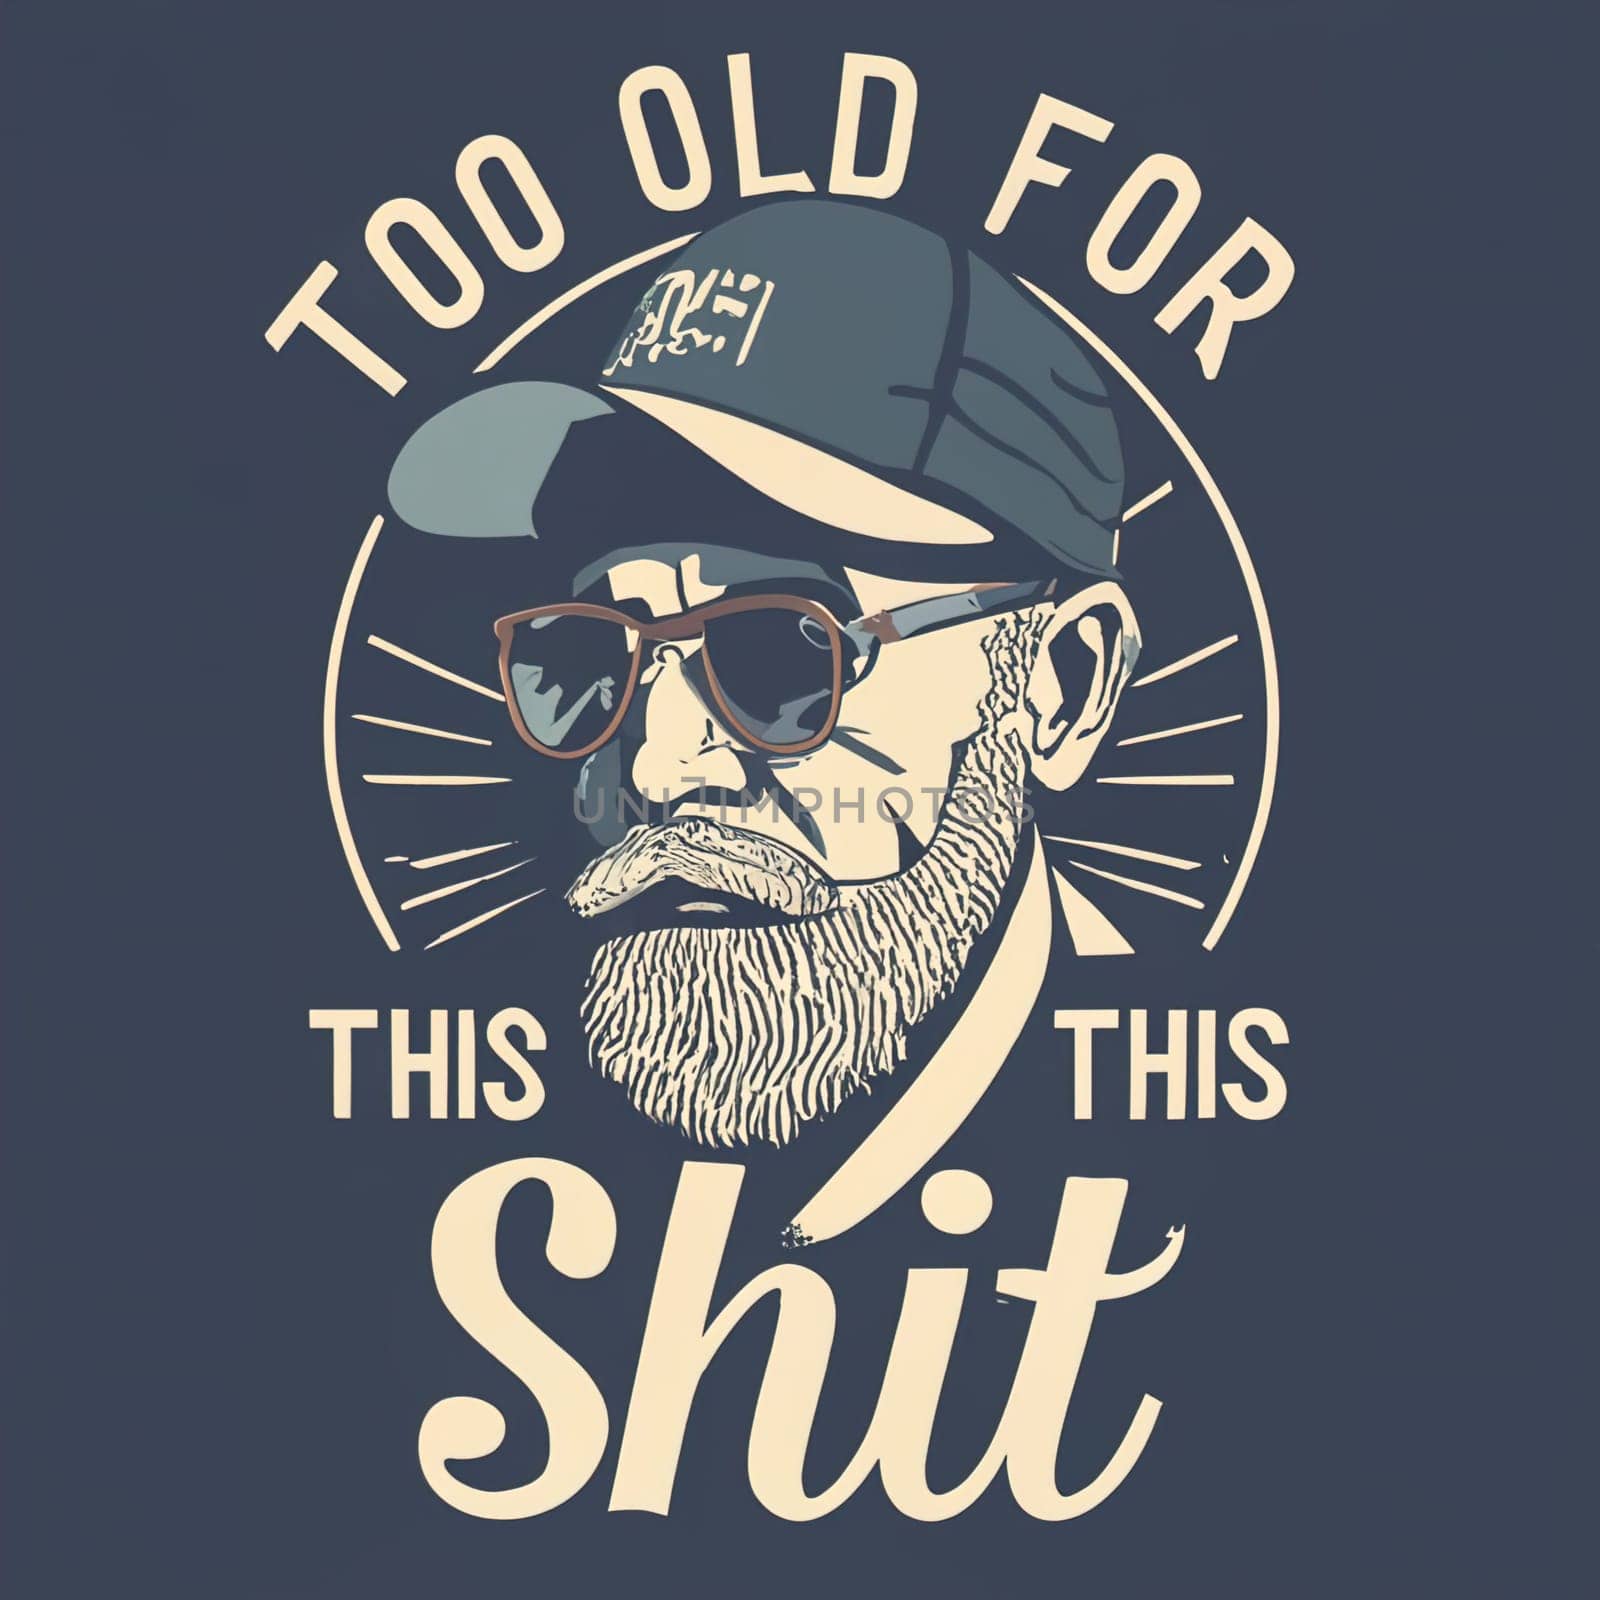 T-Shirt Design: 'Too Old for This' - Minimalist Old Man with Beard, Ray-Ban Glasses, Trucker Cap on Black Background download image